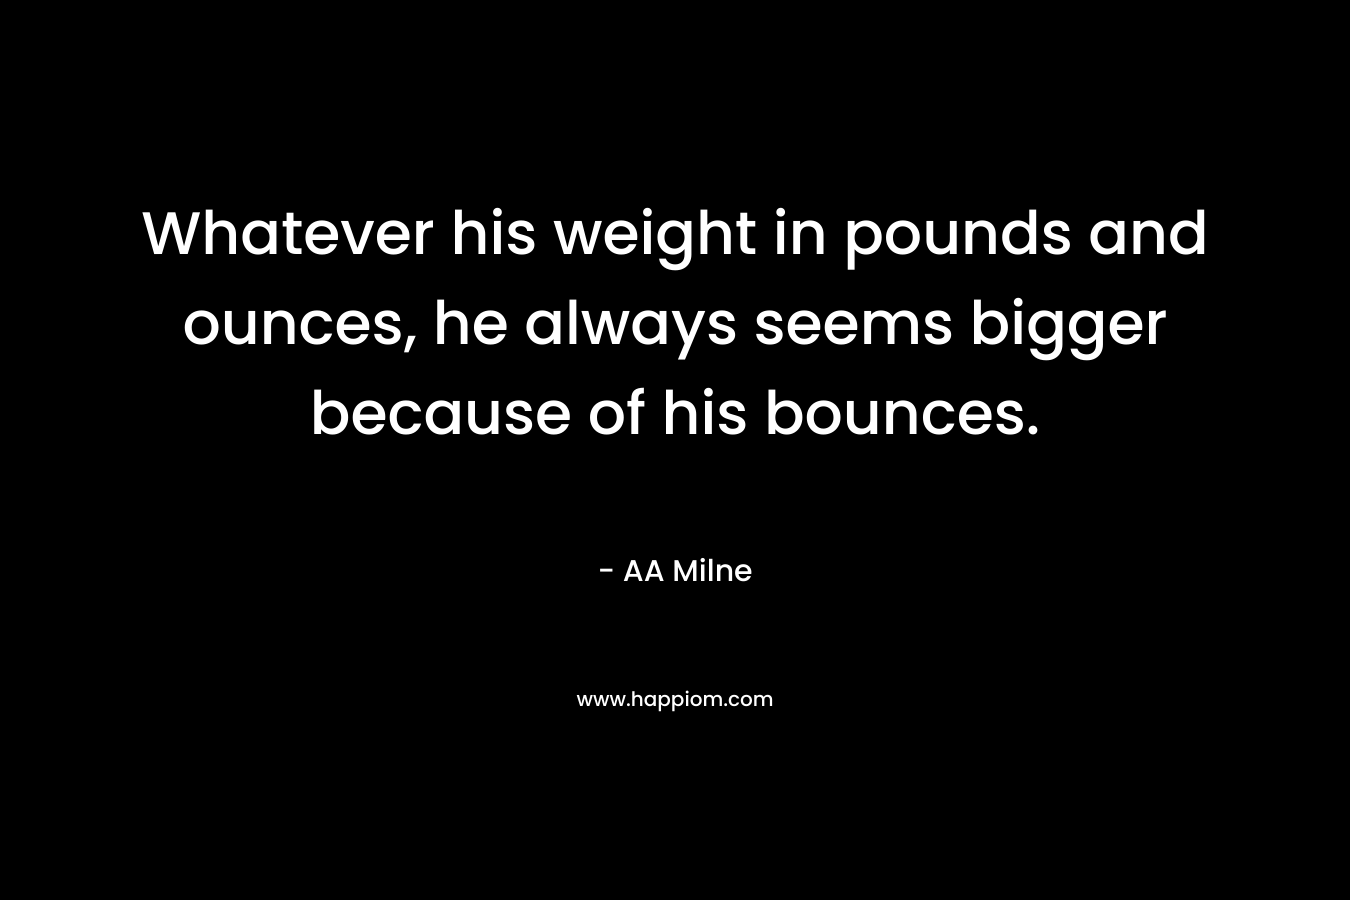 Whatever his weight in pounds and ounces, he always seems bigger because of his bounces. – AA Milne